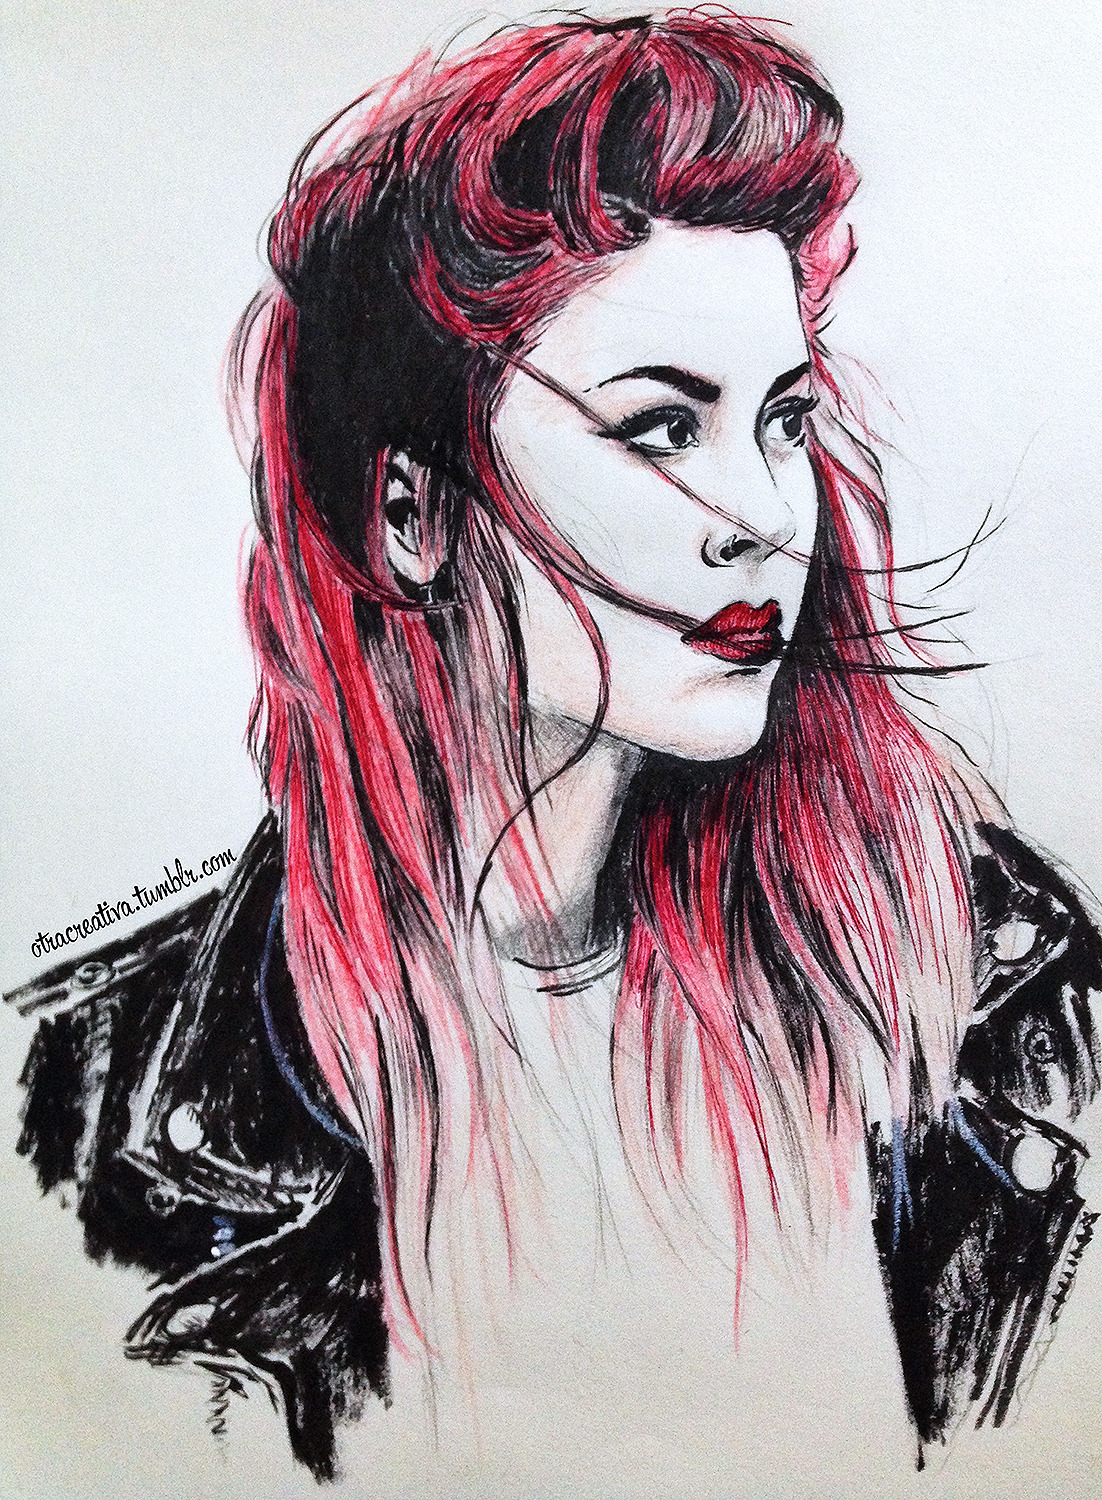 Red hair. Pencil, brush pen and colored pencil. http://otracreativa.tumblr.com/post/105259468543/red-hair-pencil-brush-pen-and-colored-pencil http://otracreativa.tumblr.com https://www.facebook.com/otracreativa